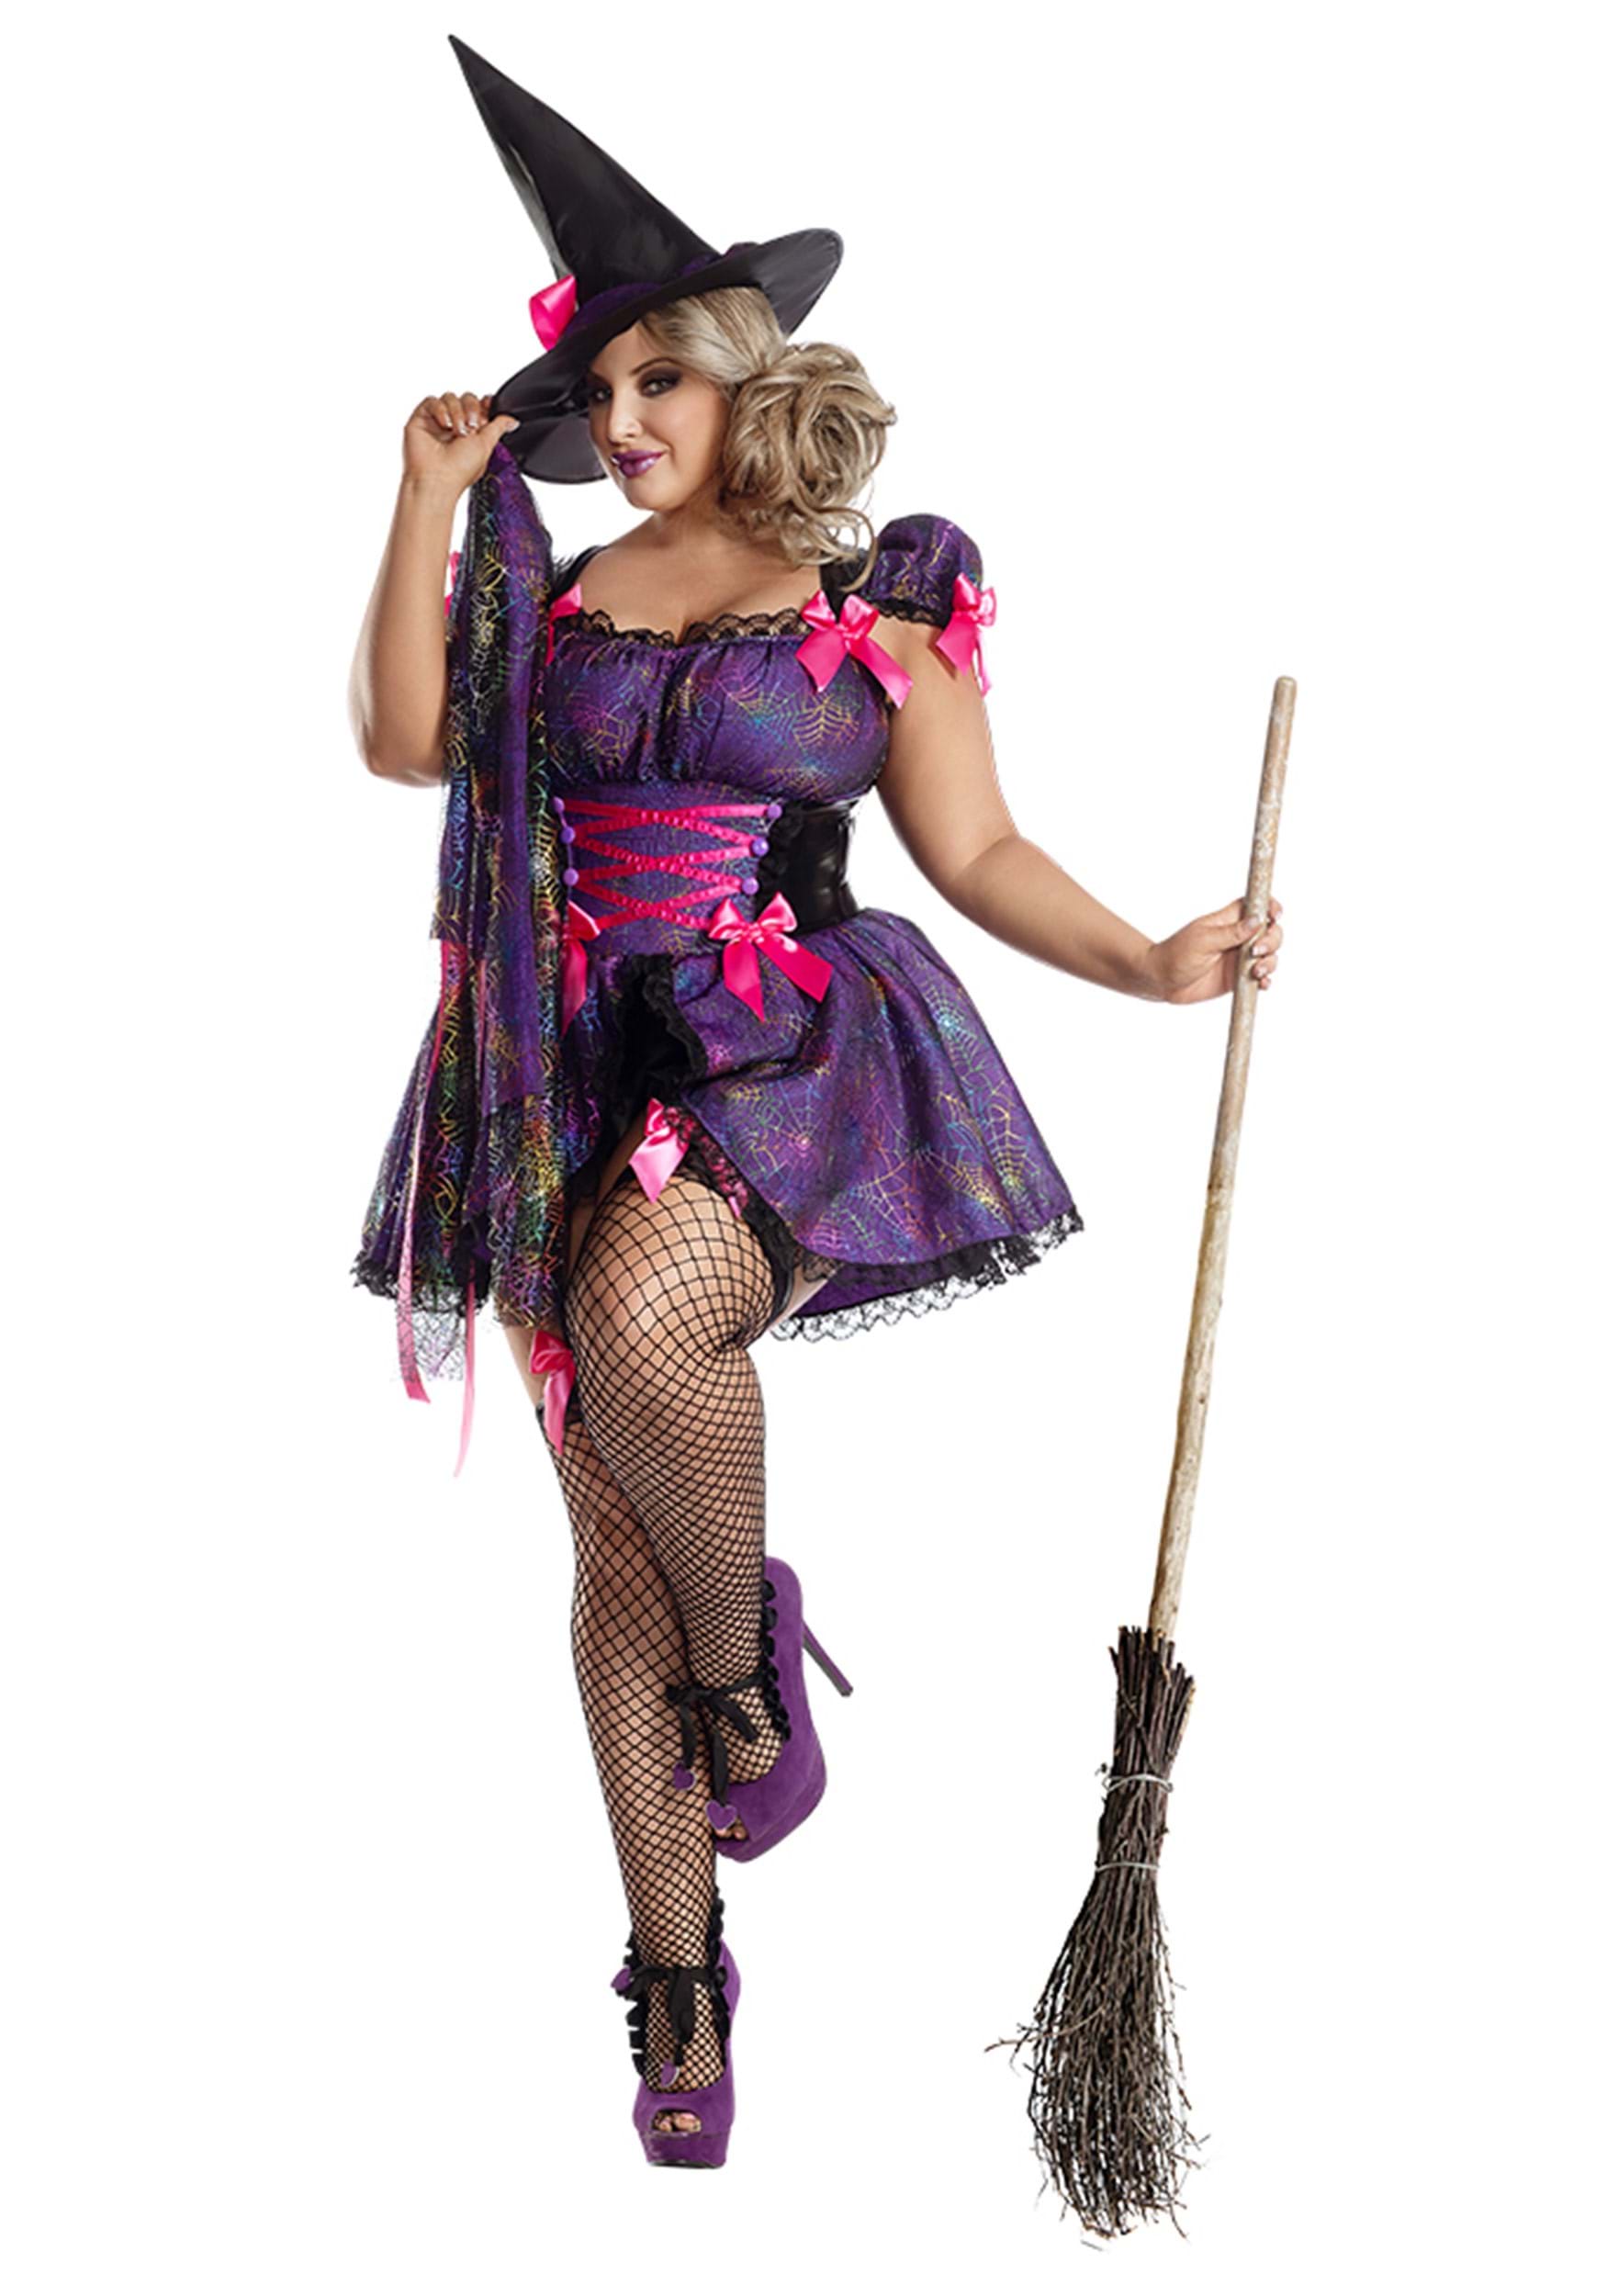 https://images.halloweencostumes.com/products/71839/1-1/womens-plus-purple-web-witch-costume.jpg